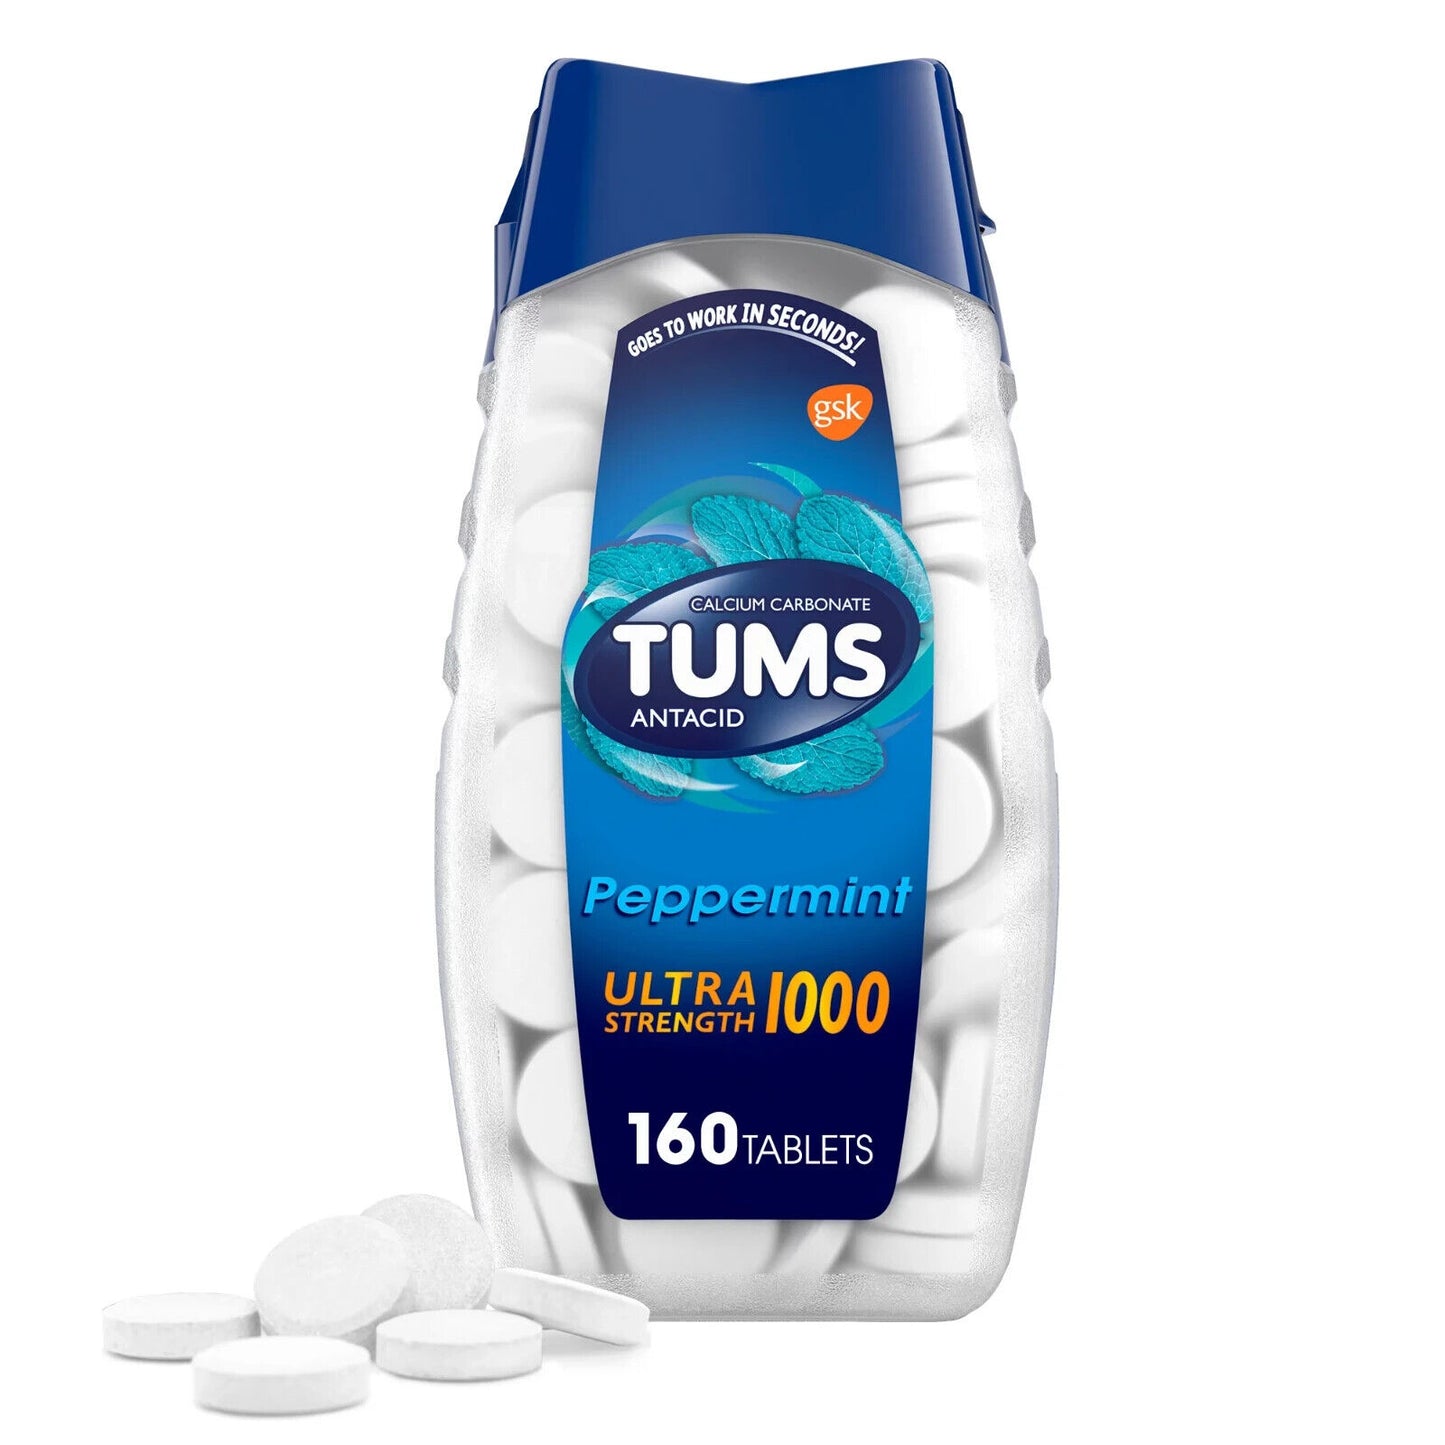 Tums Ultra Strength 1000 Peppermint Antacid Tablets 160 Ct